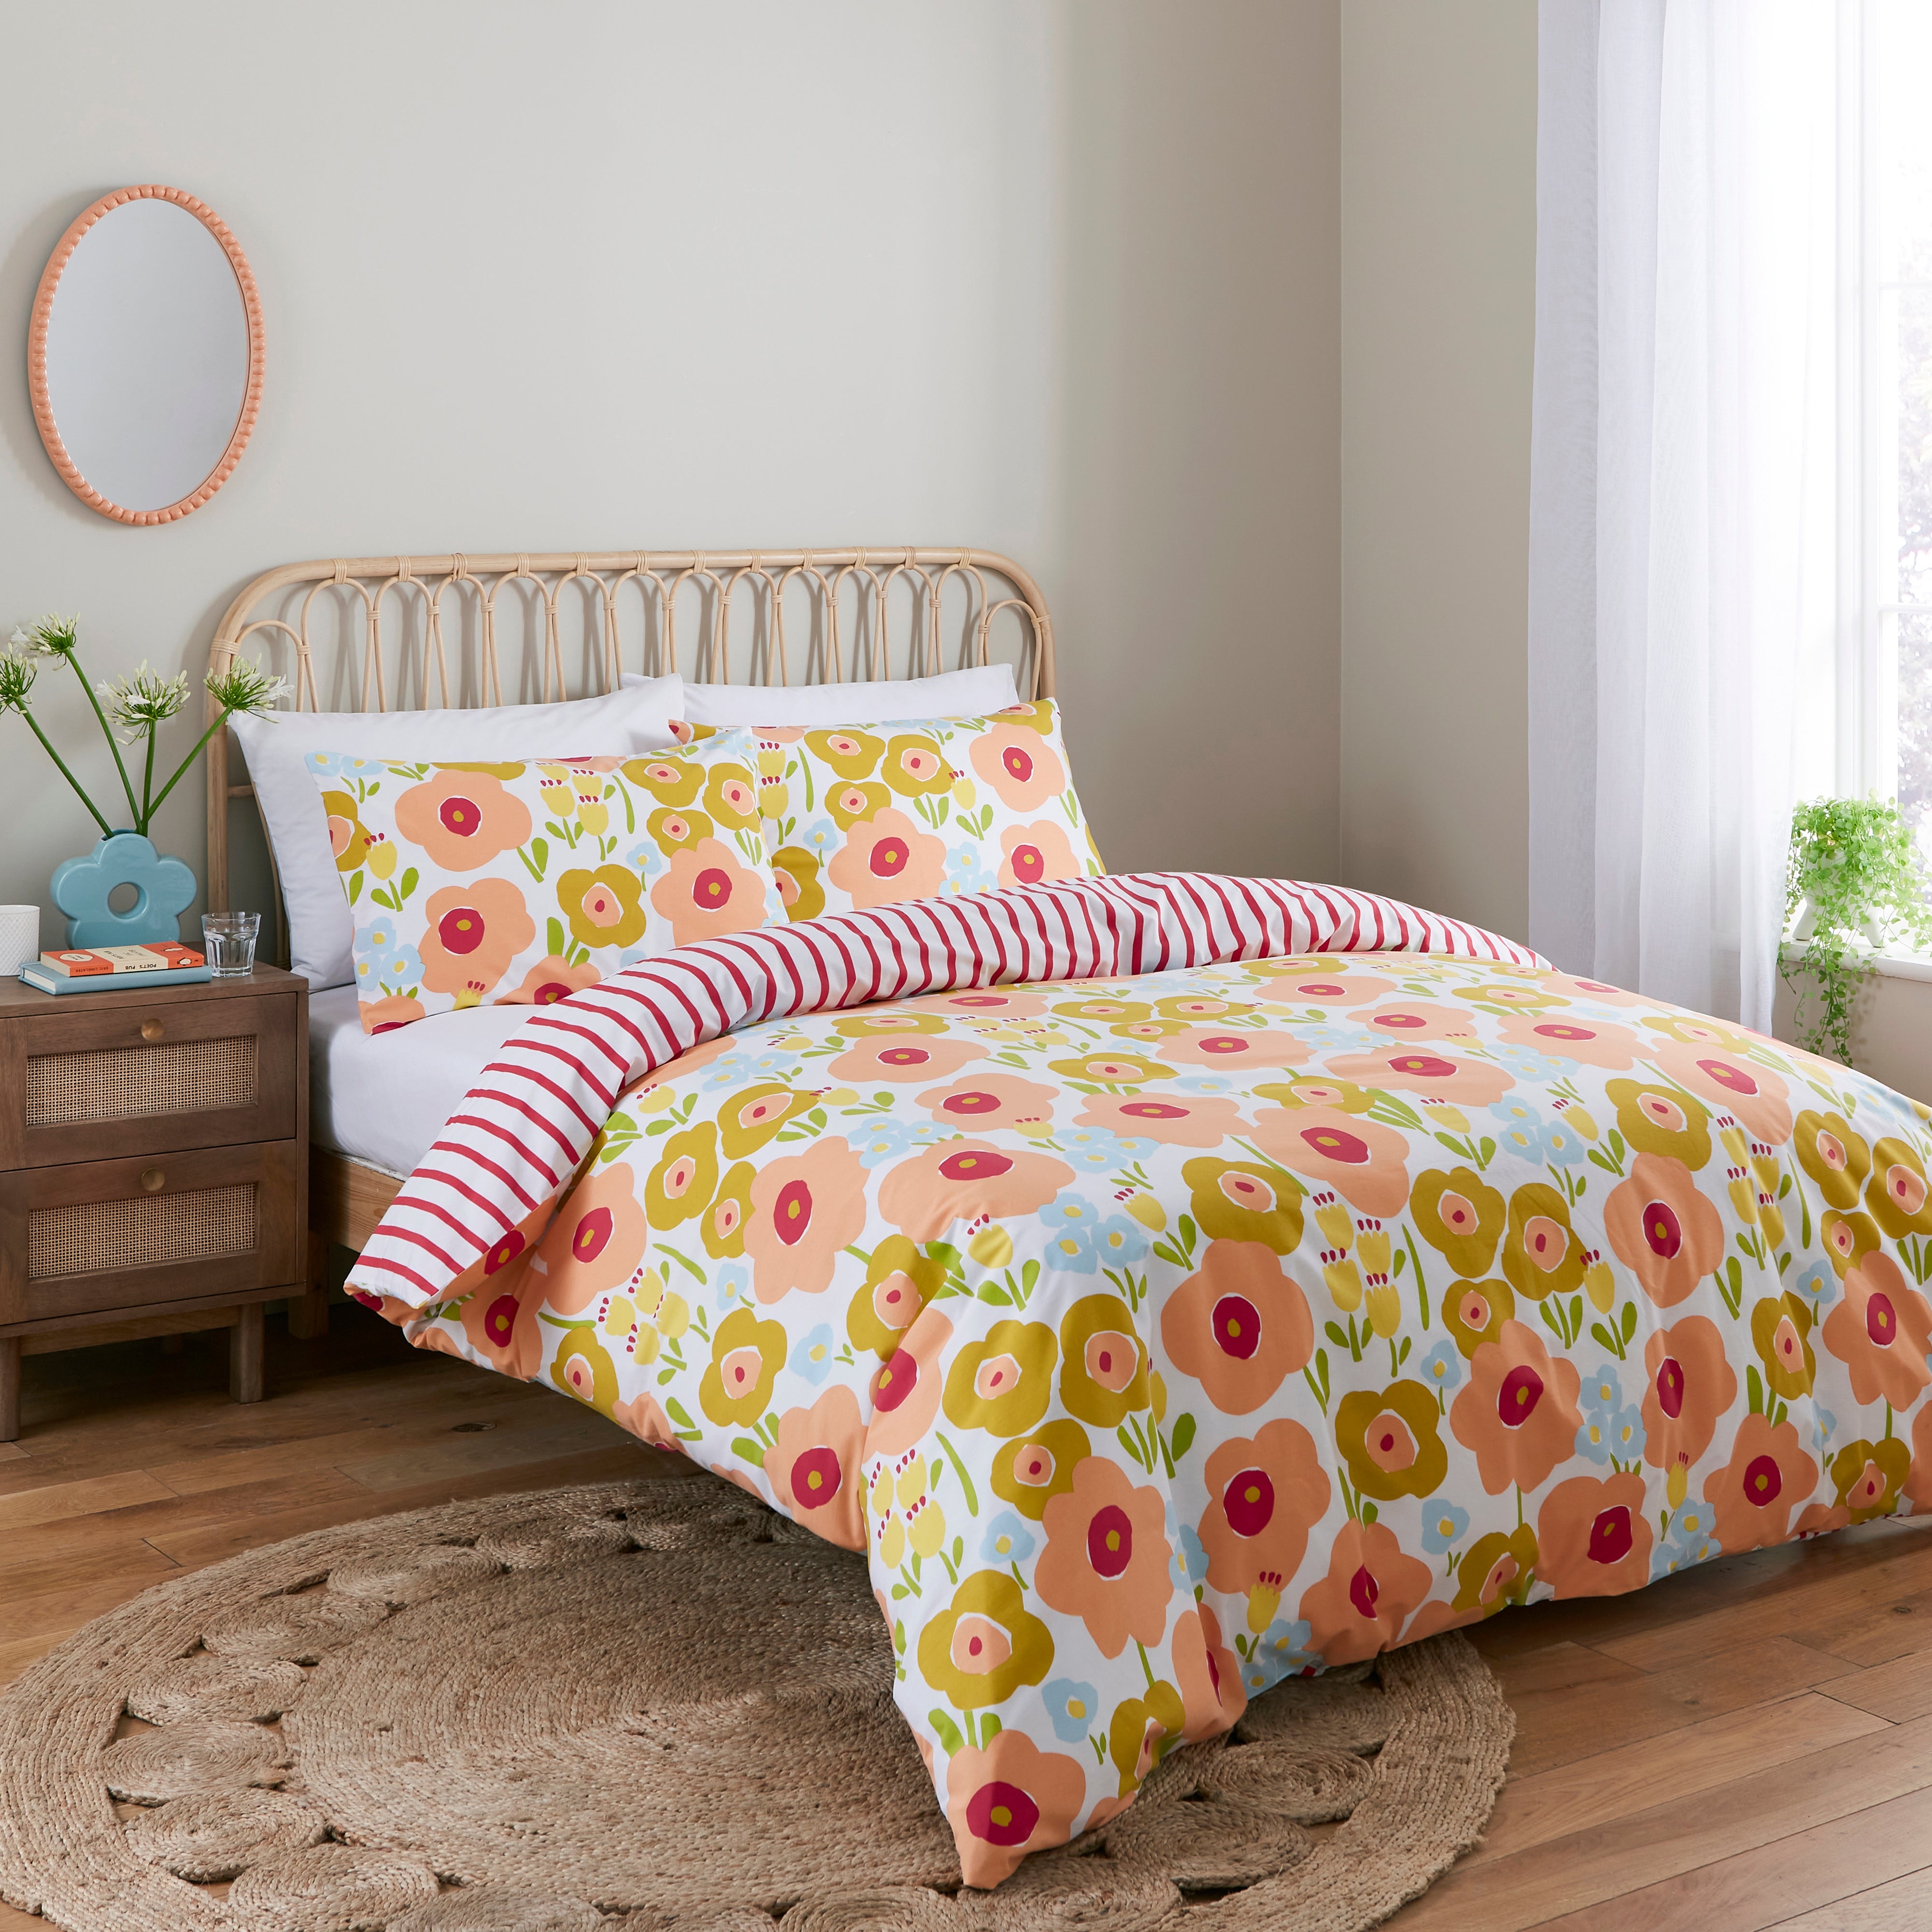 Spring Bloom Pink Duvet Cover and Pillowcase Set